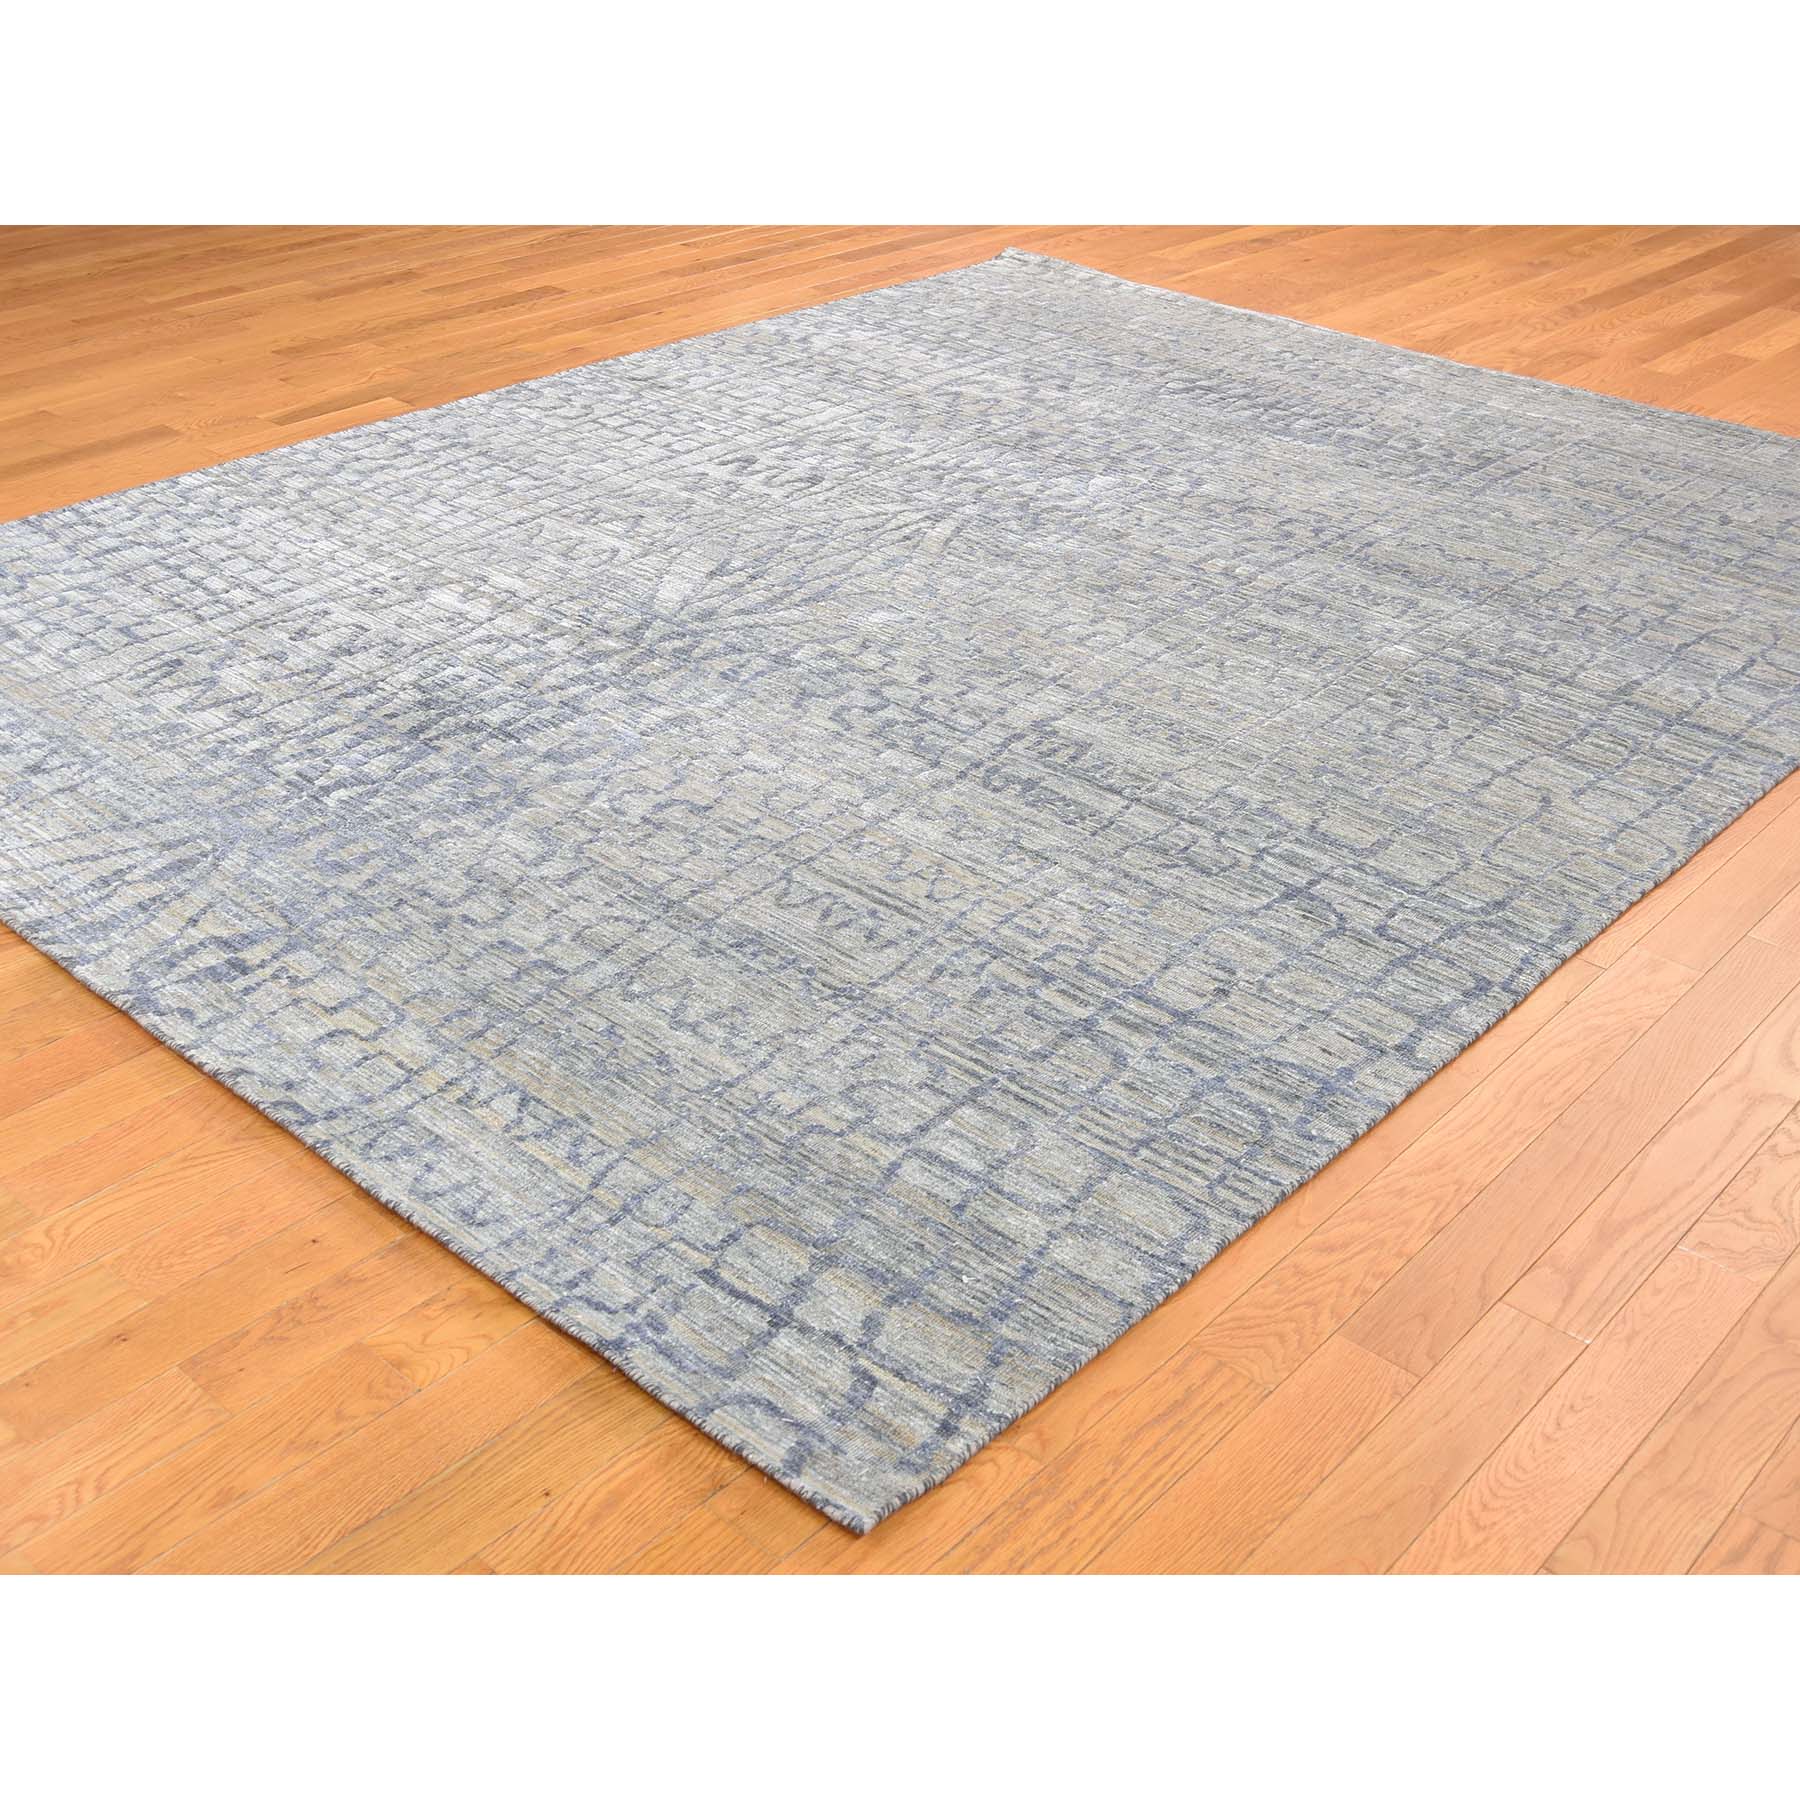 8'x10'1" THE ERASED MOROCCAN Silk with Textured Wool Hand Woven Oriental Rug 